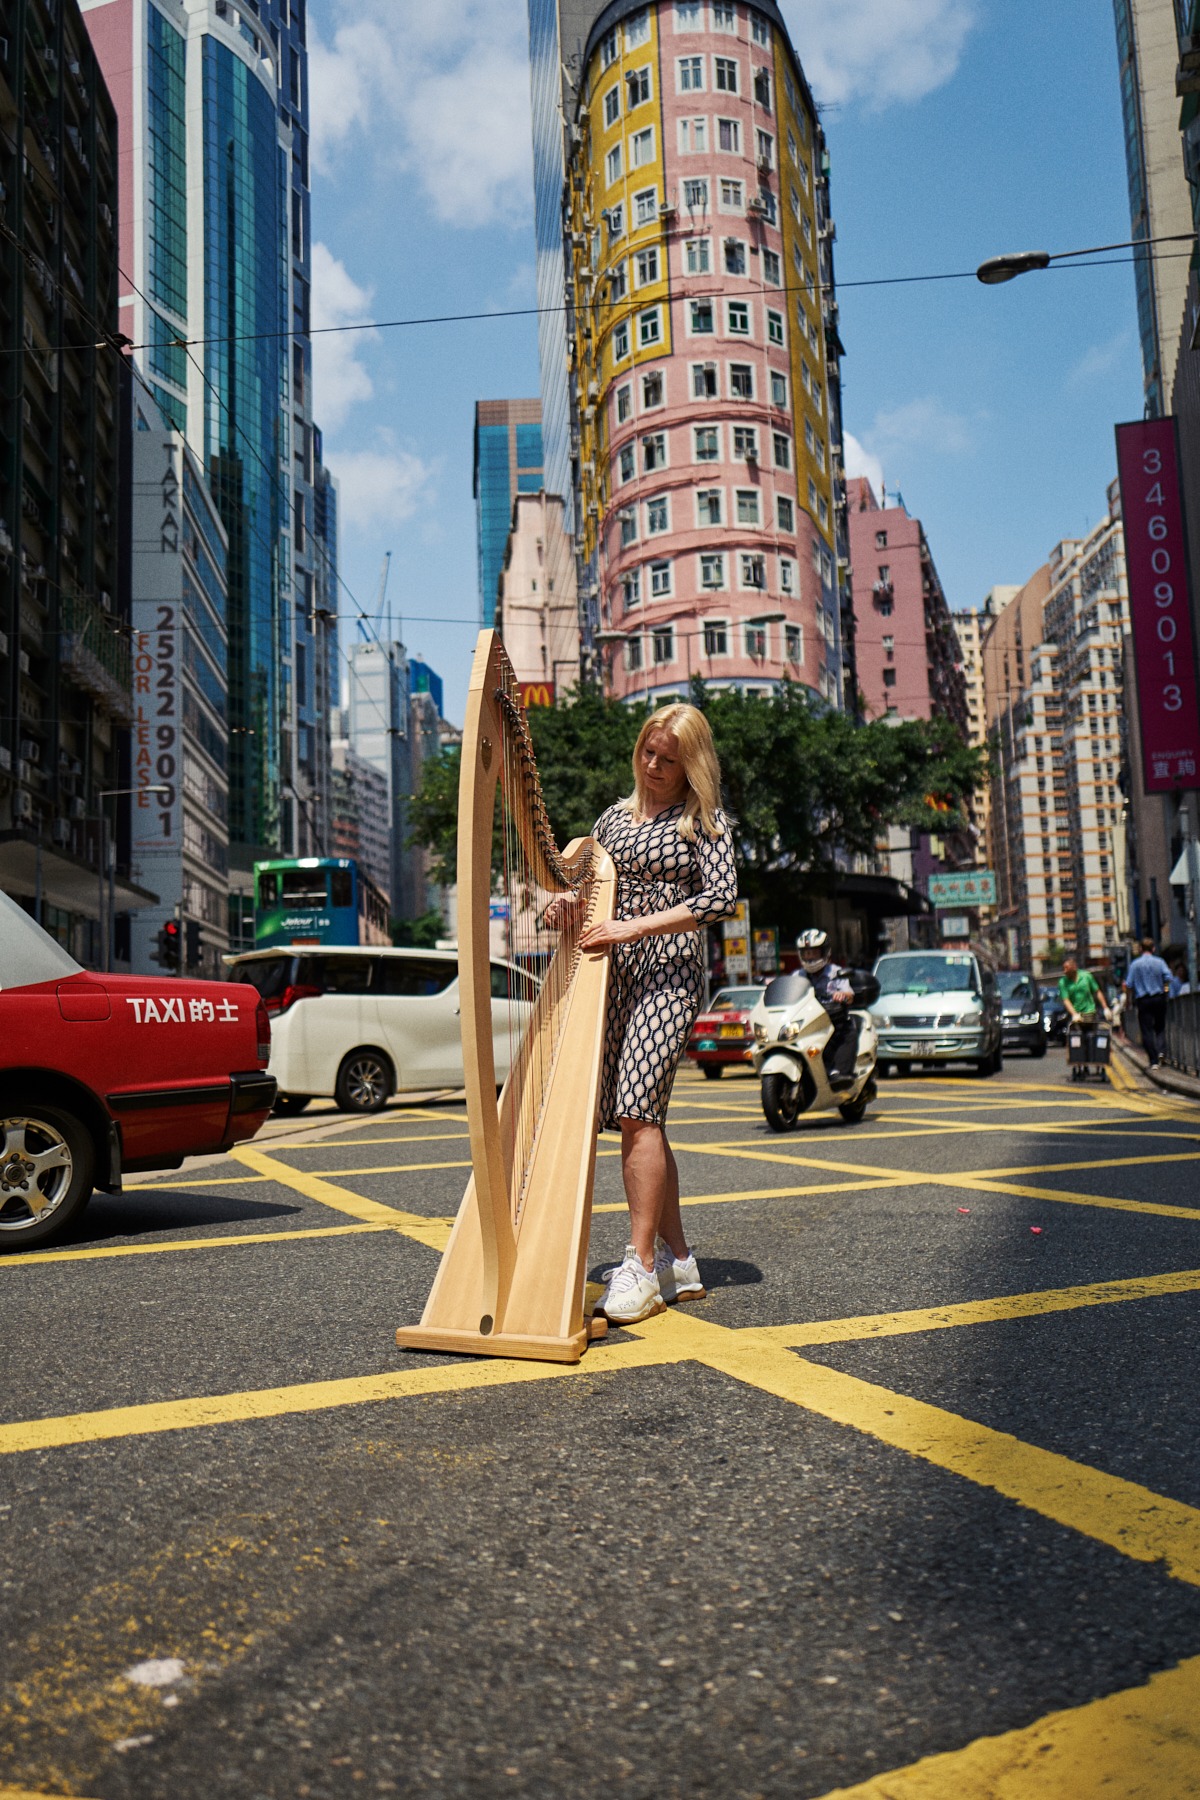 quadro nuevo sony classical hong kong by Mike Meyer Photography